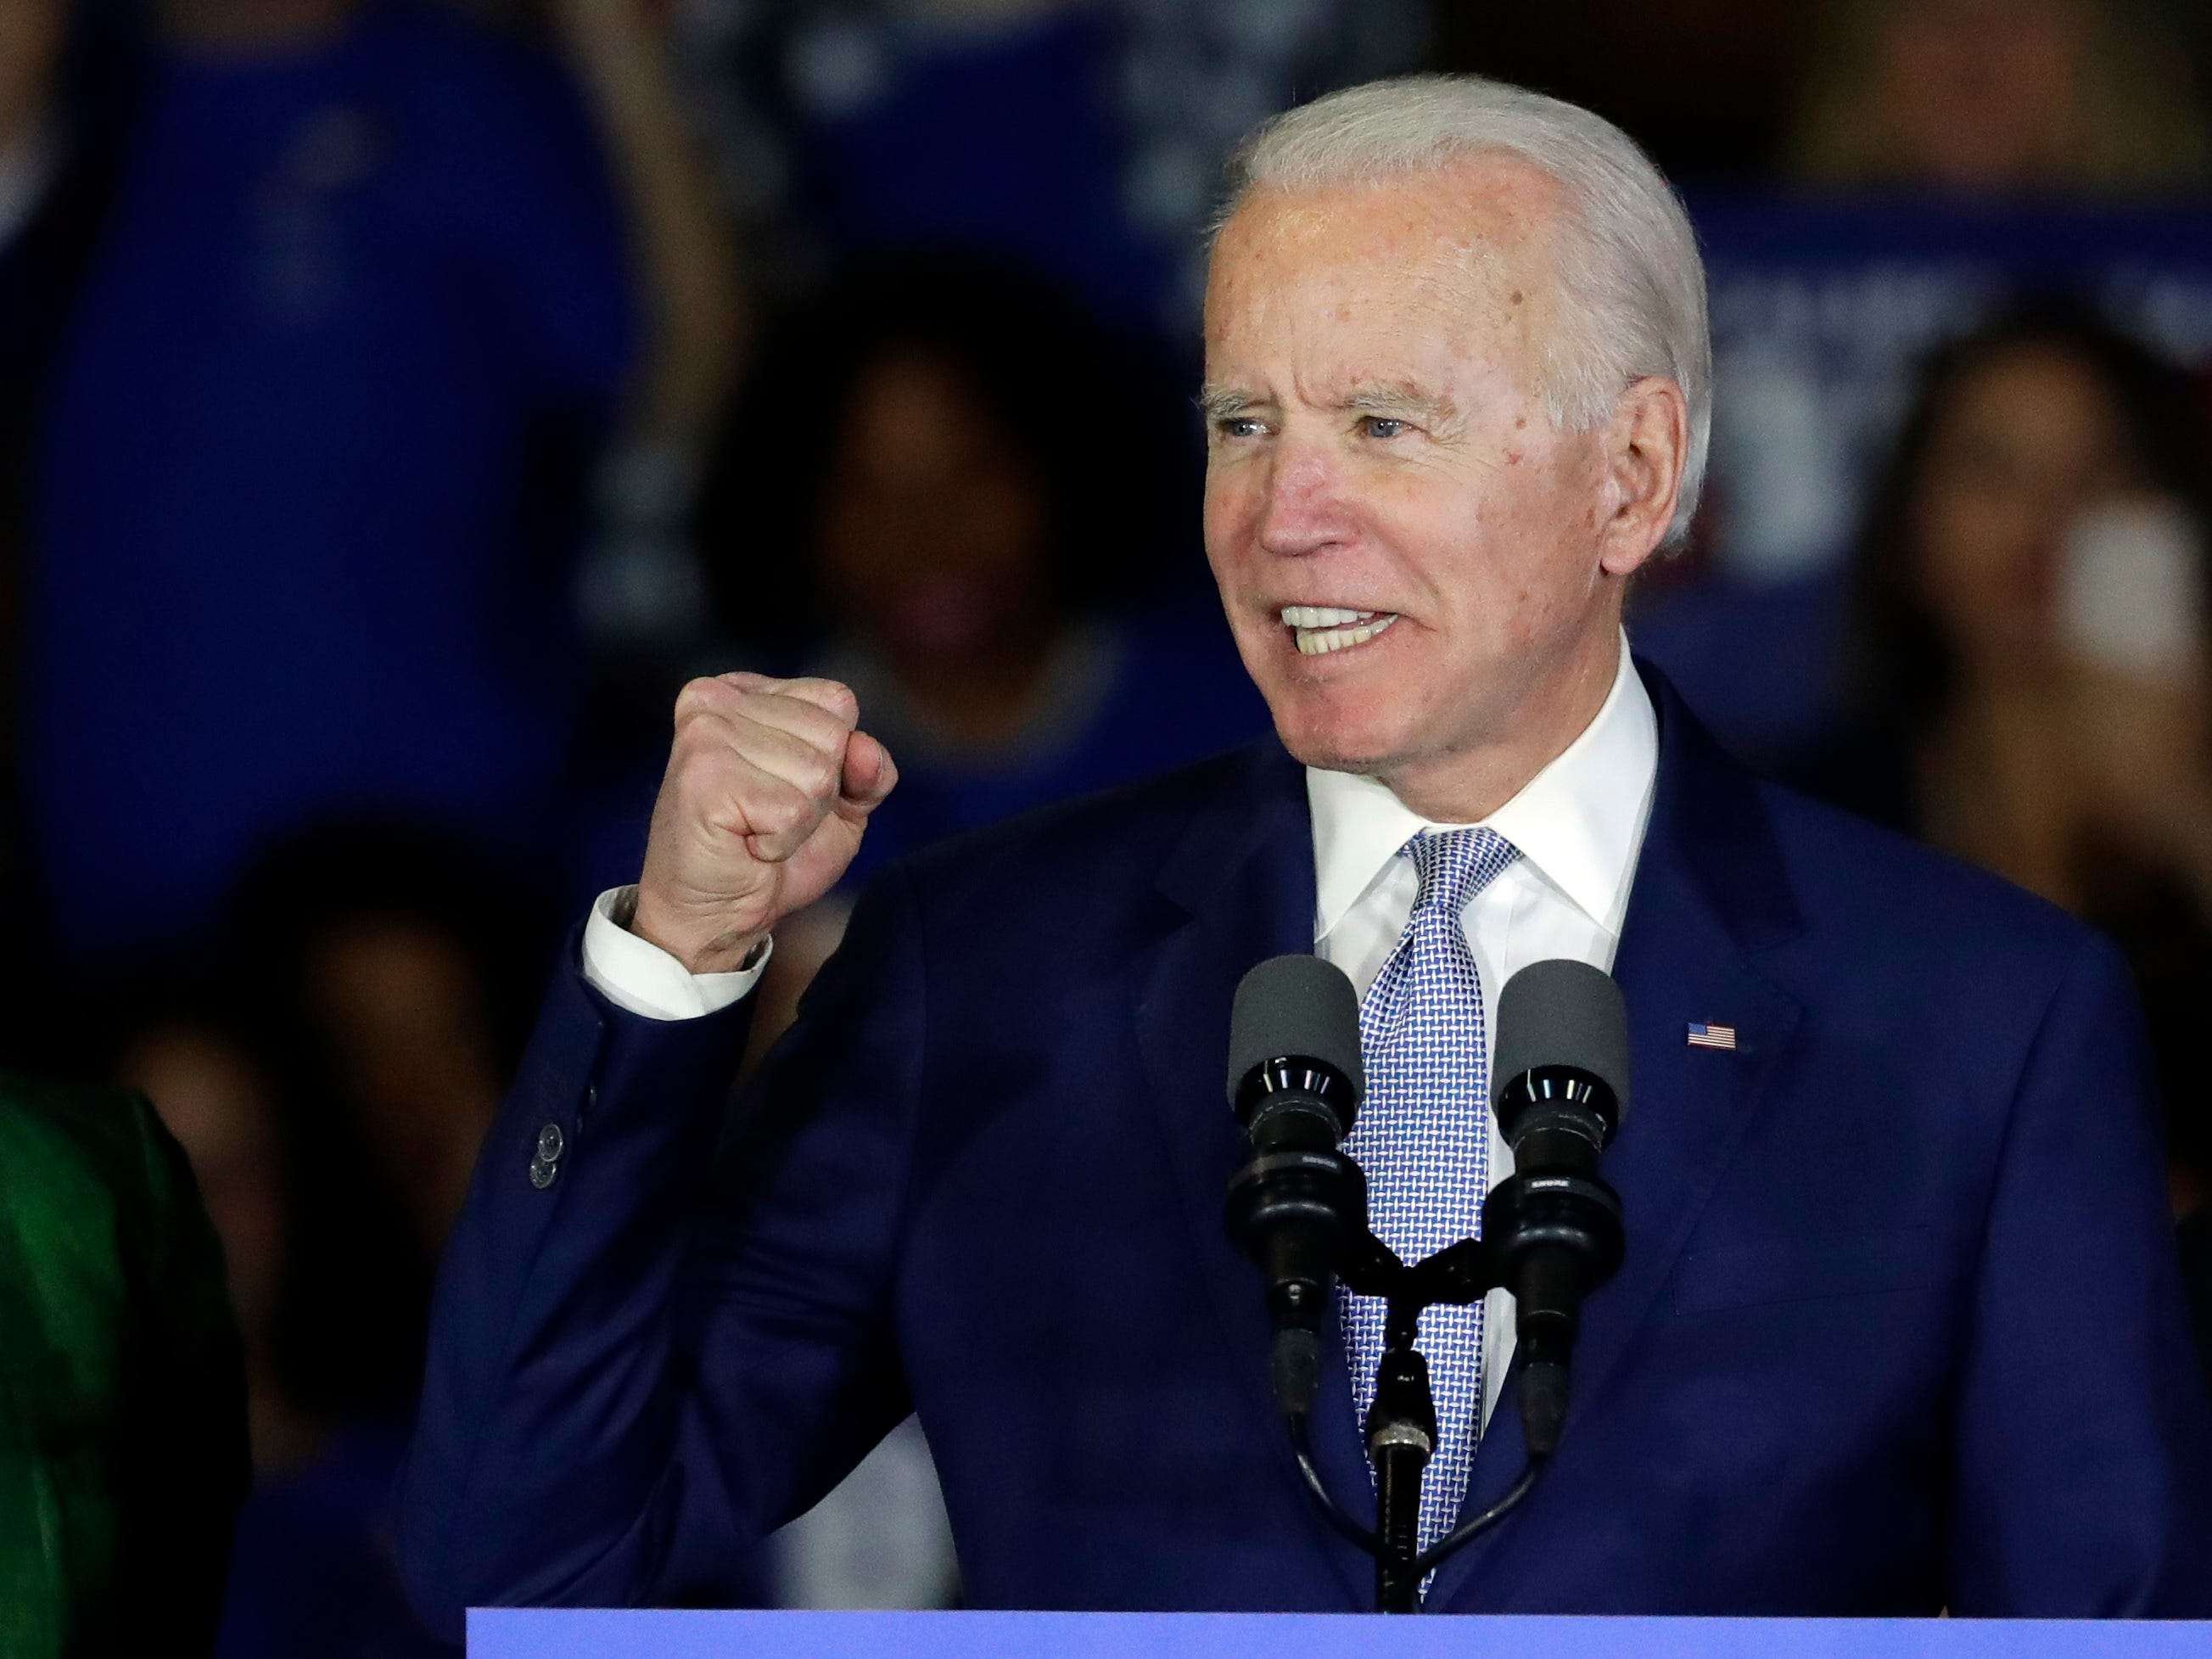 'Not paid later, Joe Biden calls for rent and mortgage payments to be canceled